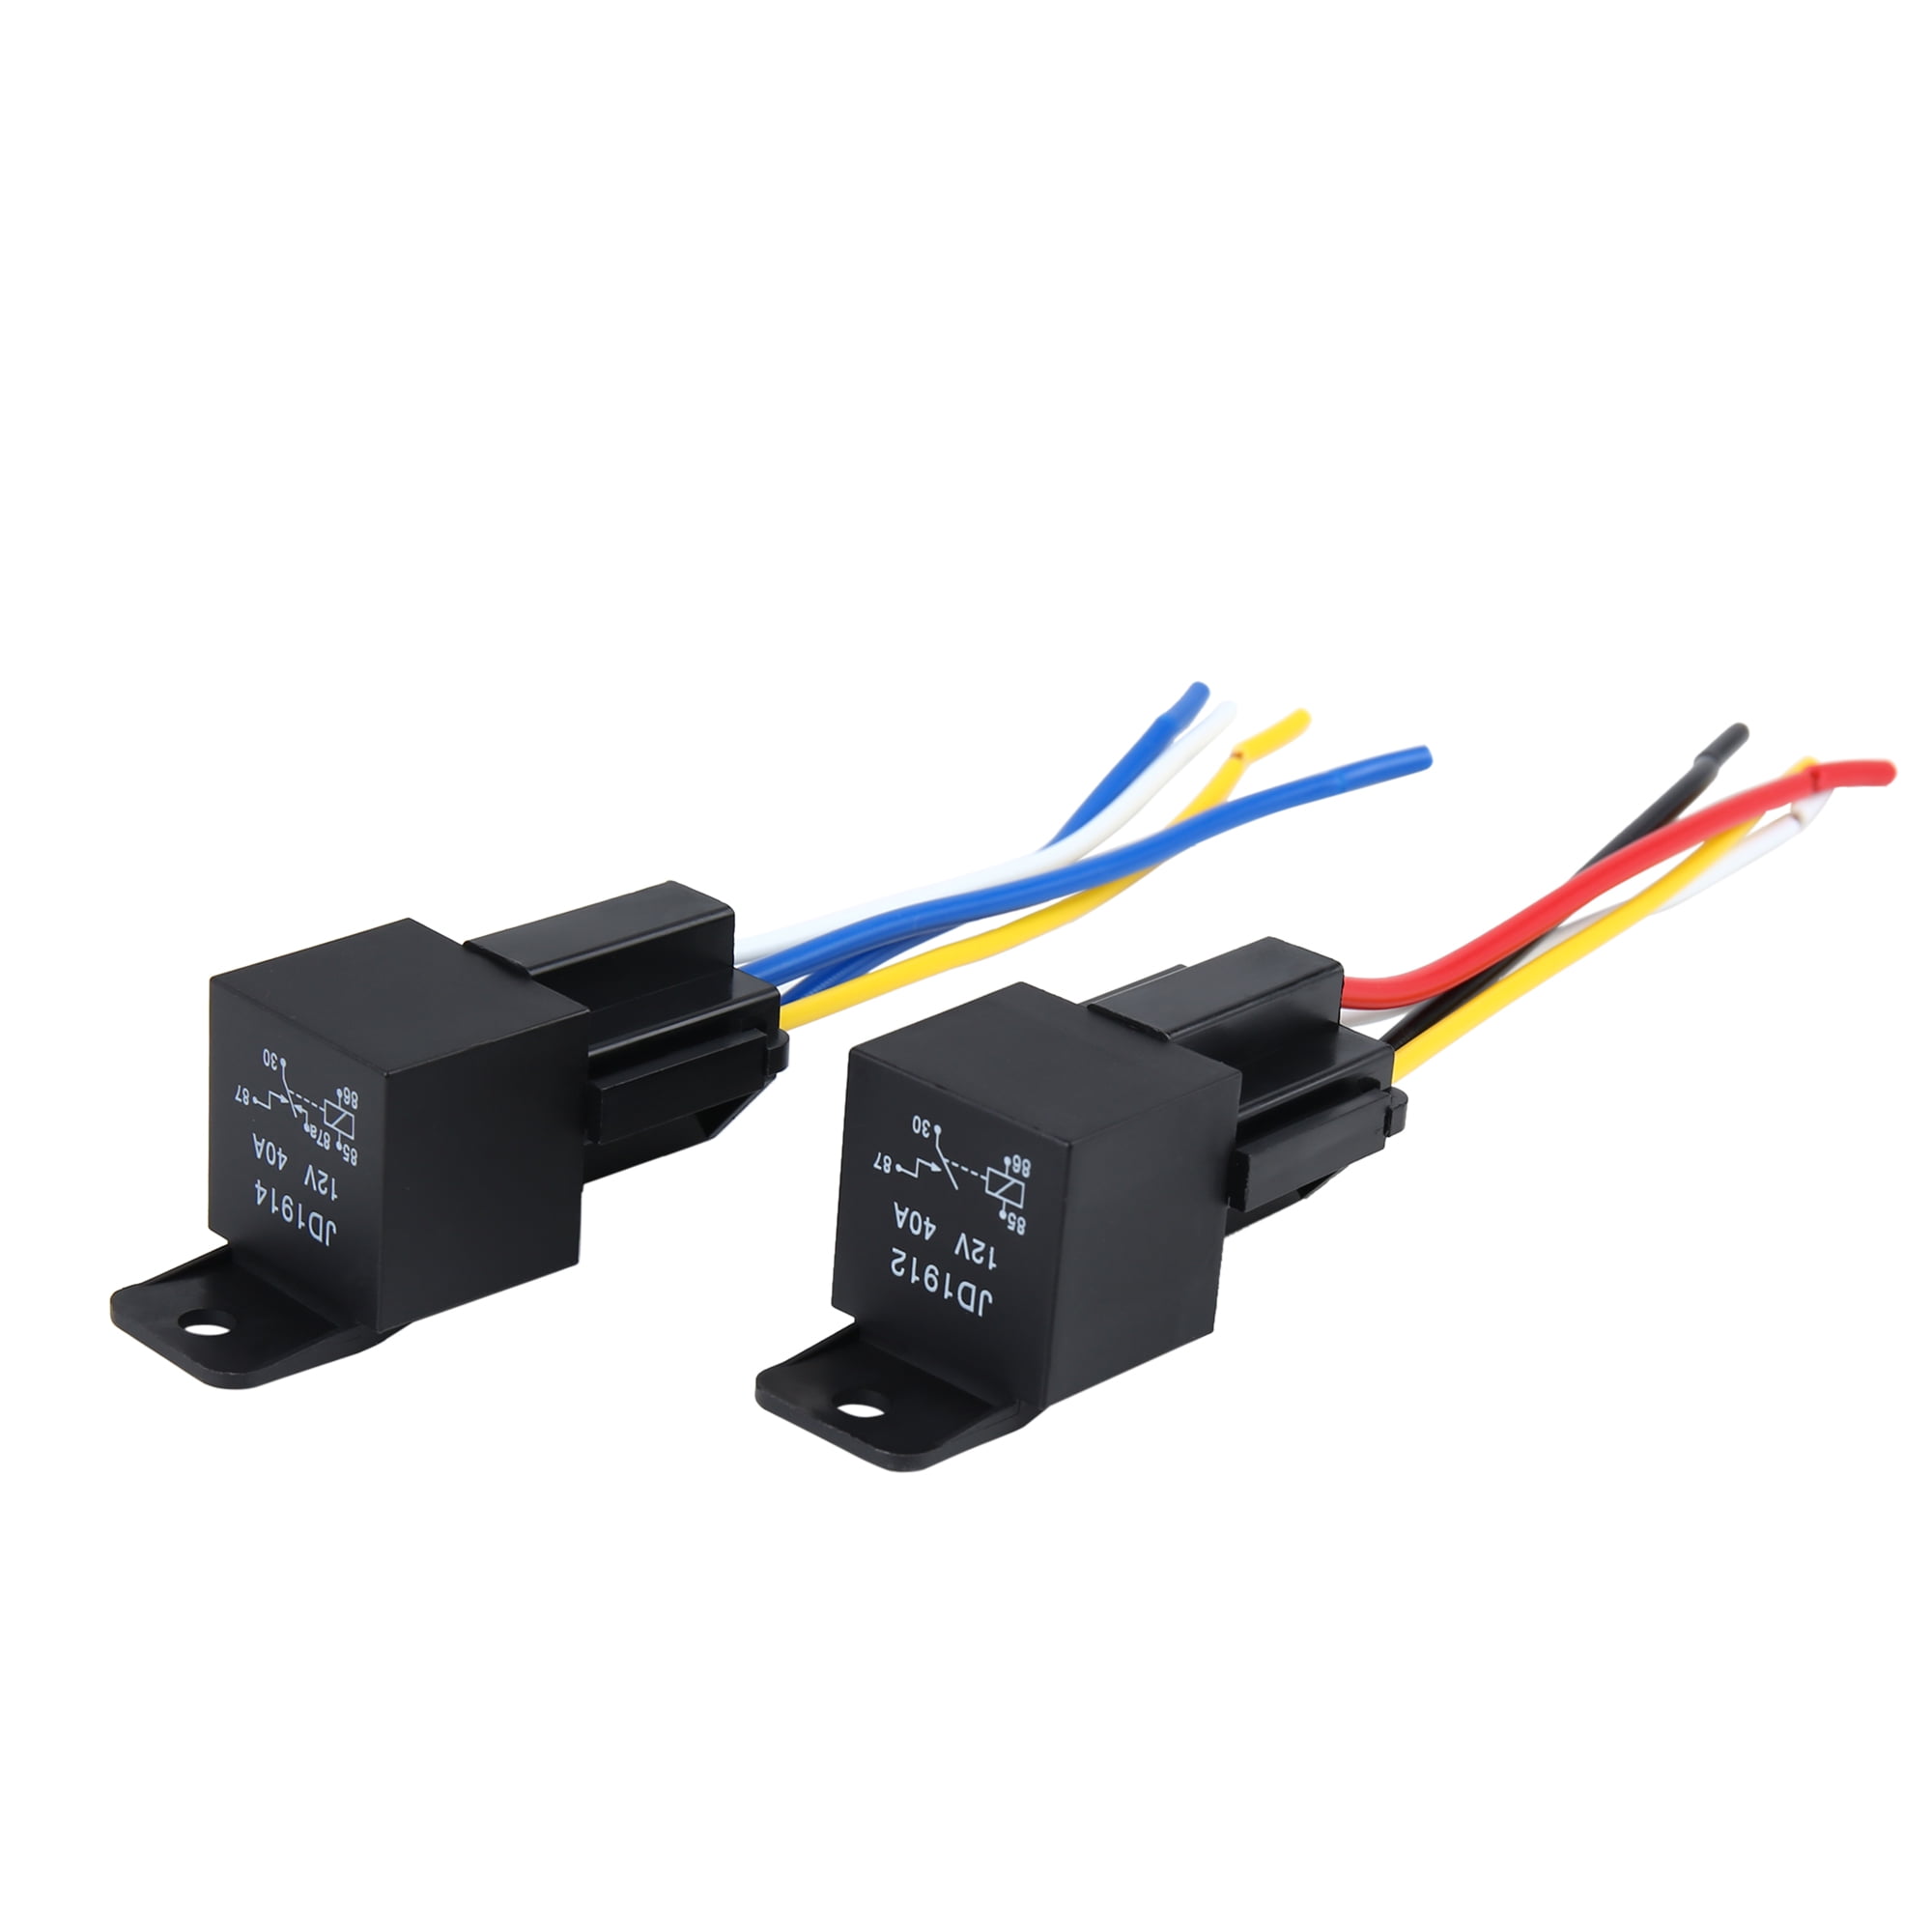 30A/40A 12V 5 Pin SPST Car Auto Relay With 5 Wires Harness Socket For Car Alarm 